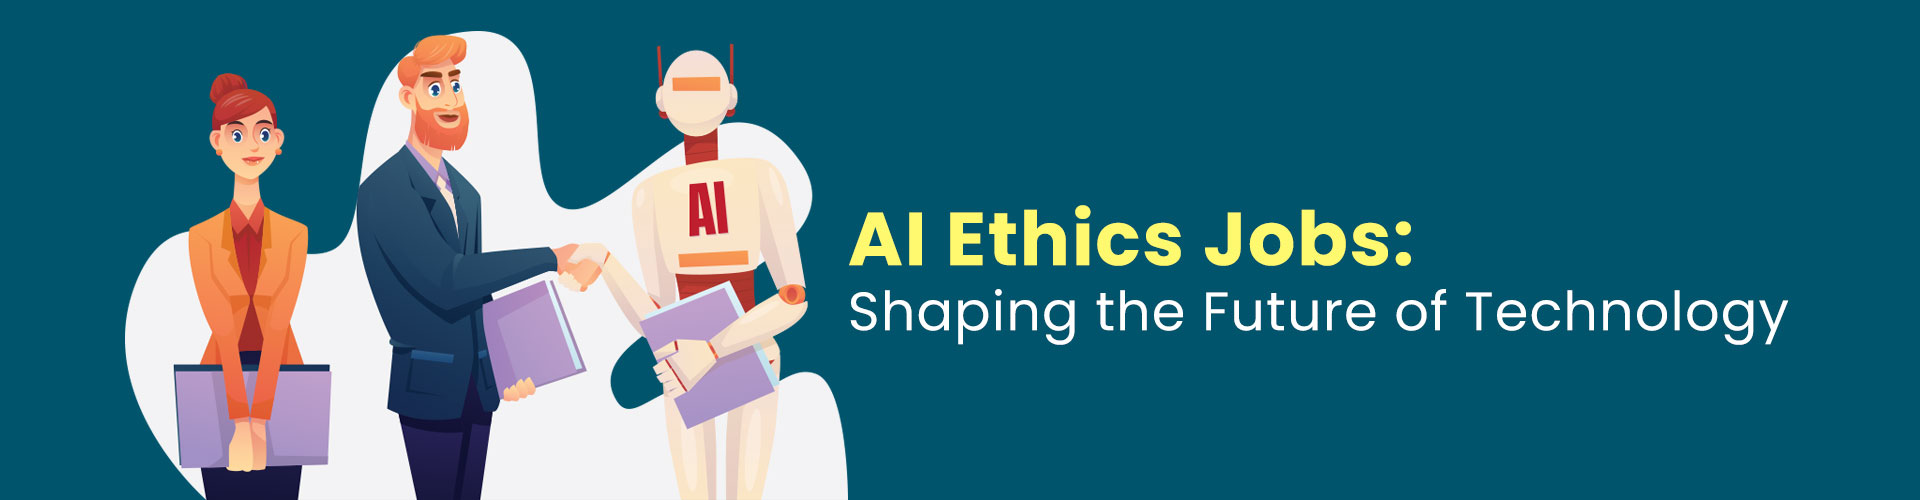 AI Ethics Jobs: Shaping the Future of Technology